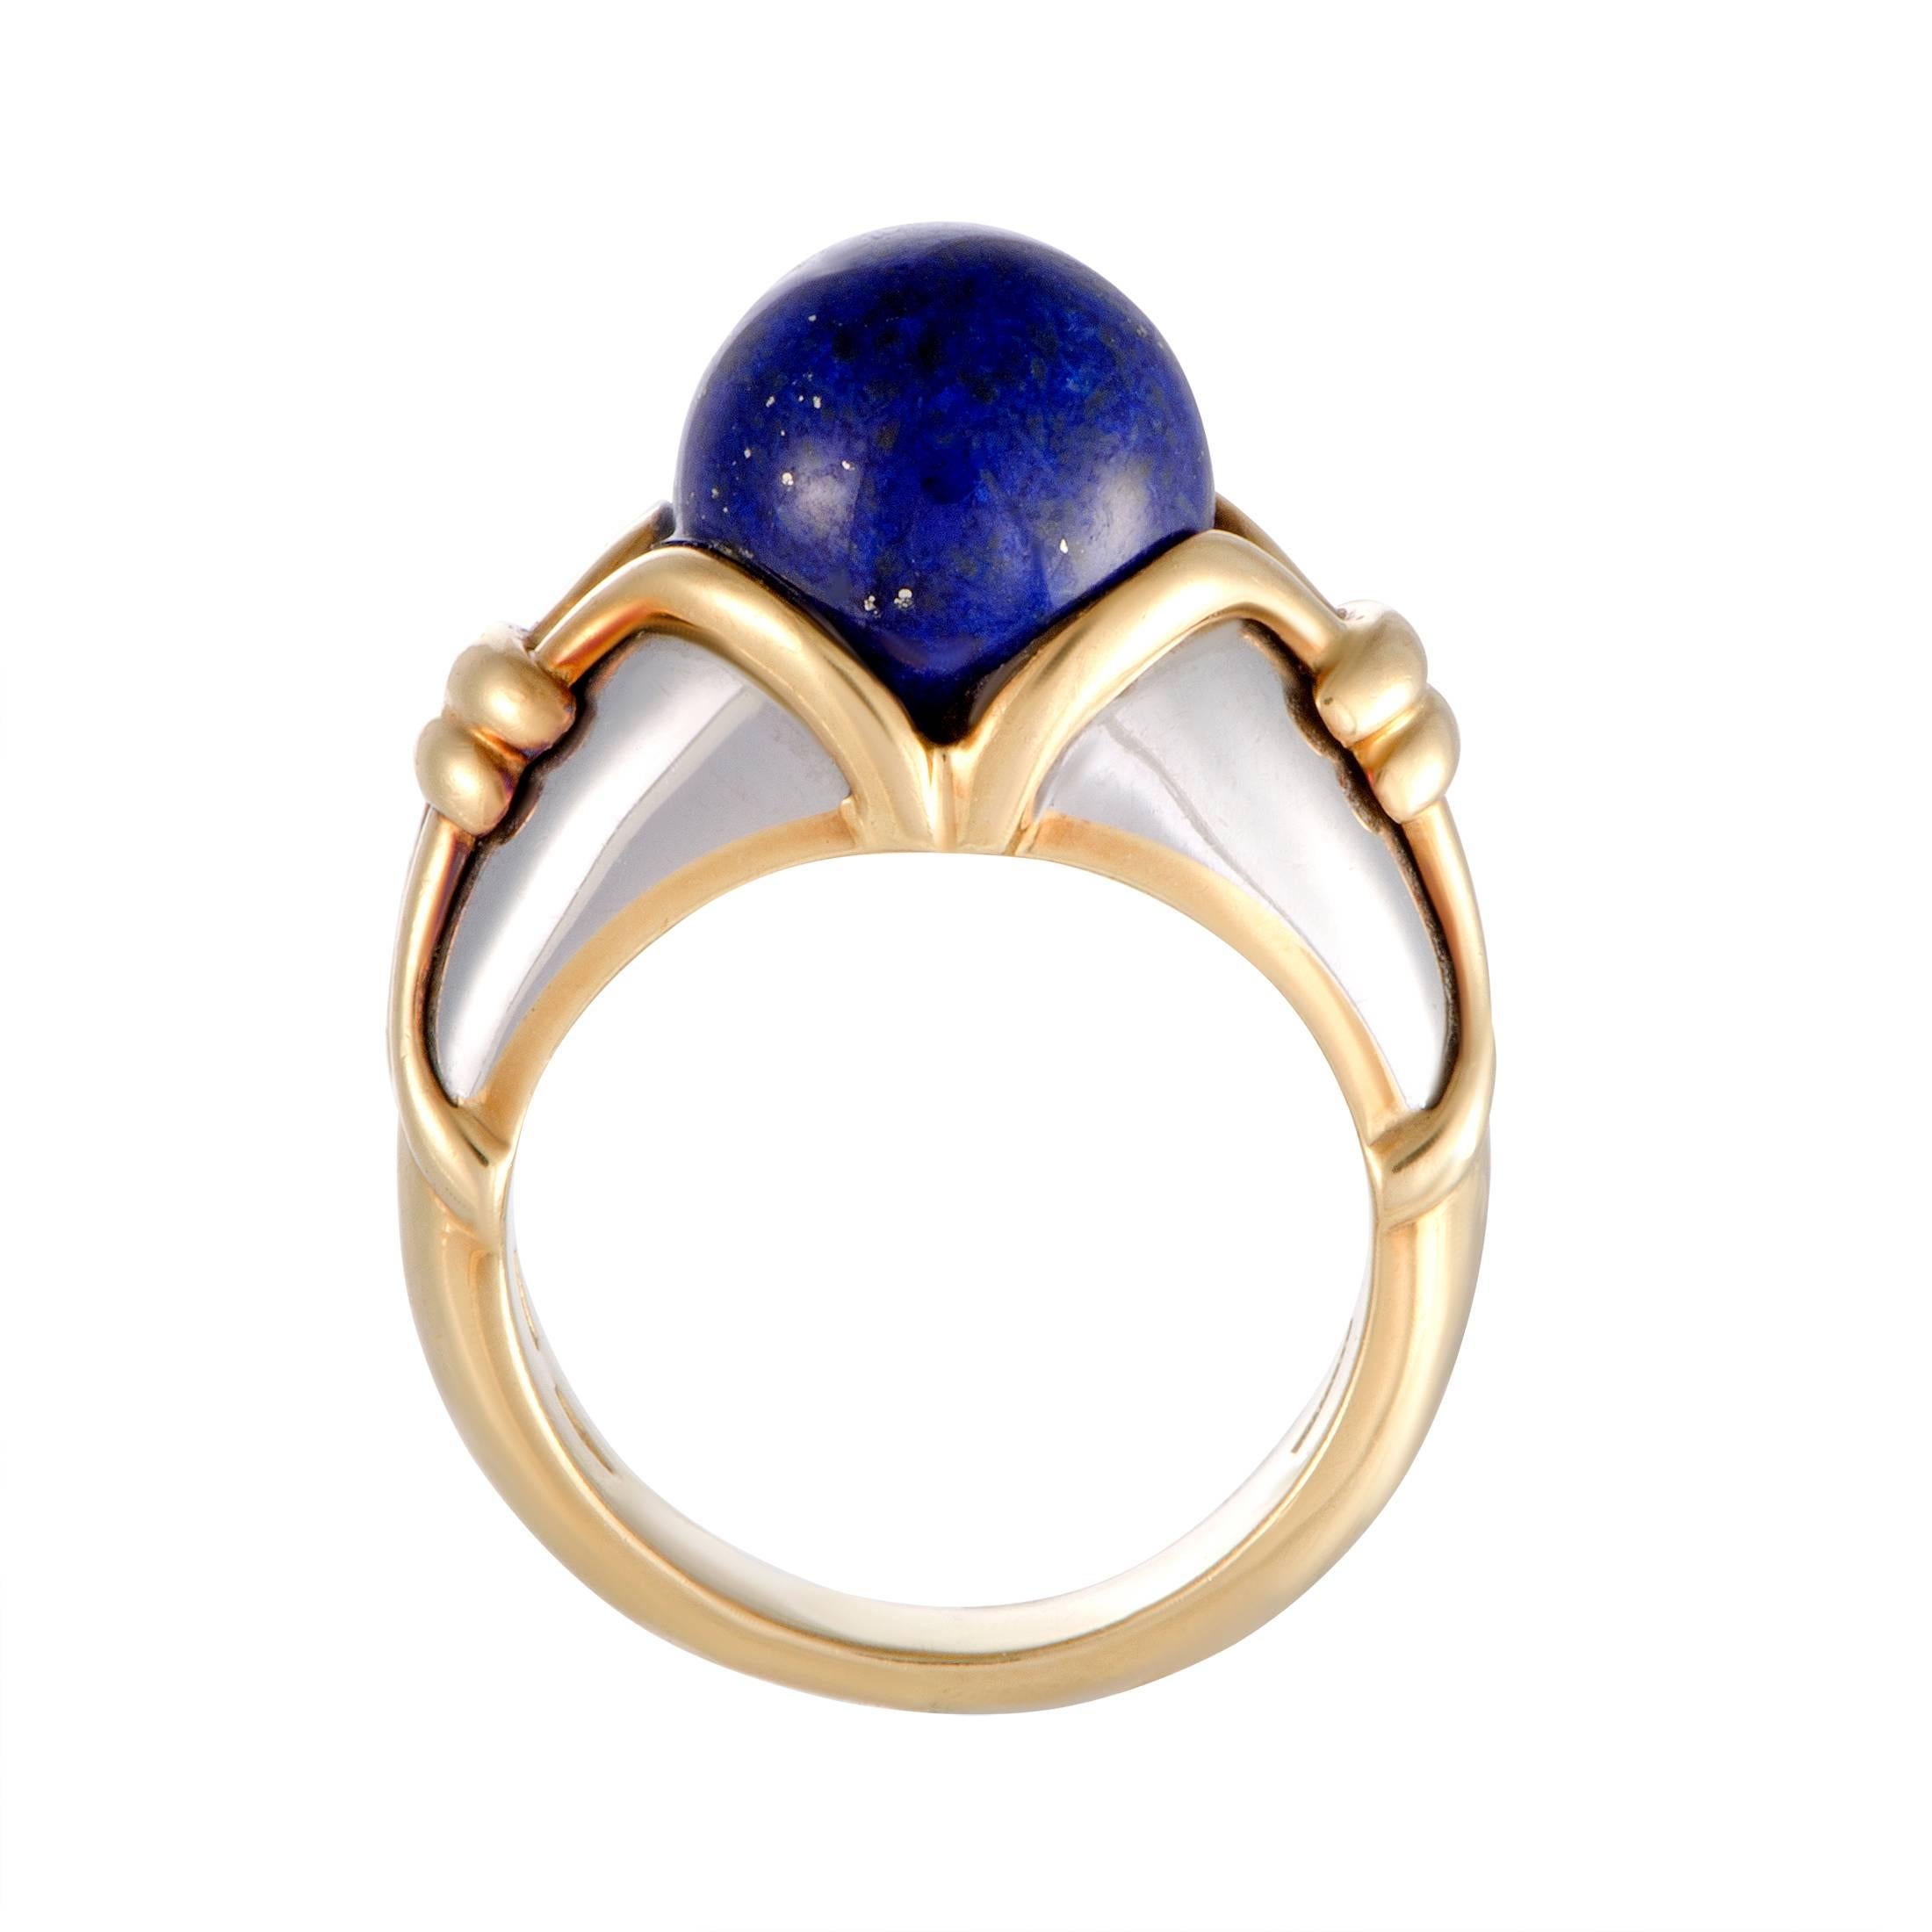 Combining 18K yellow and white gold with captivating lapis lazuli, this extraordinary ring boasts an incredibly eye-catching, fashionable appeal. The ring is a Bulgari design and weighs 10.3 grams.
Included Items: Manufacturer's Box
Ring Size: